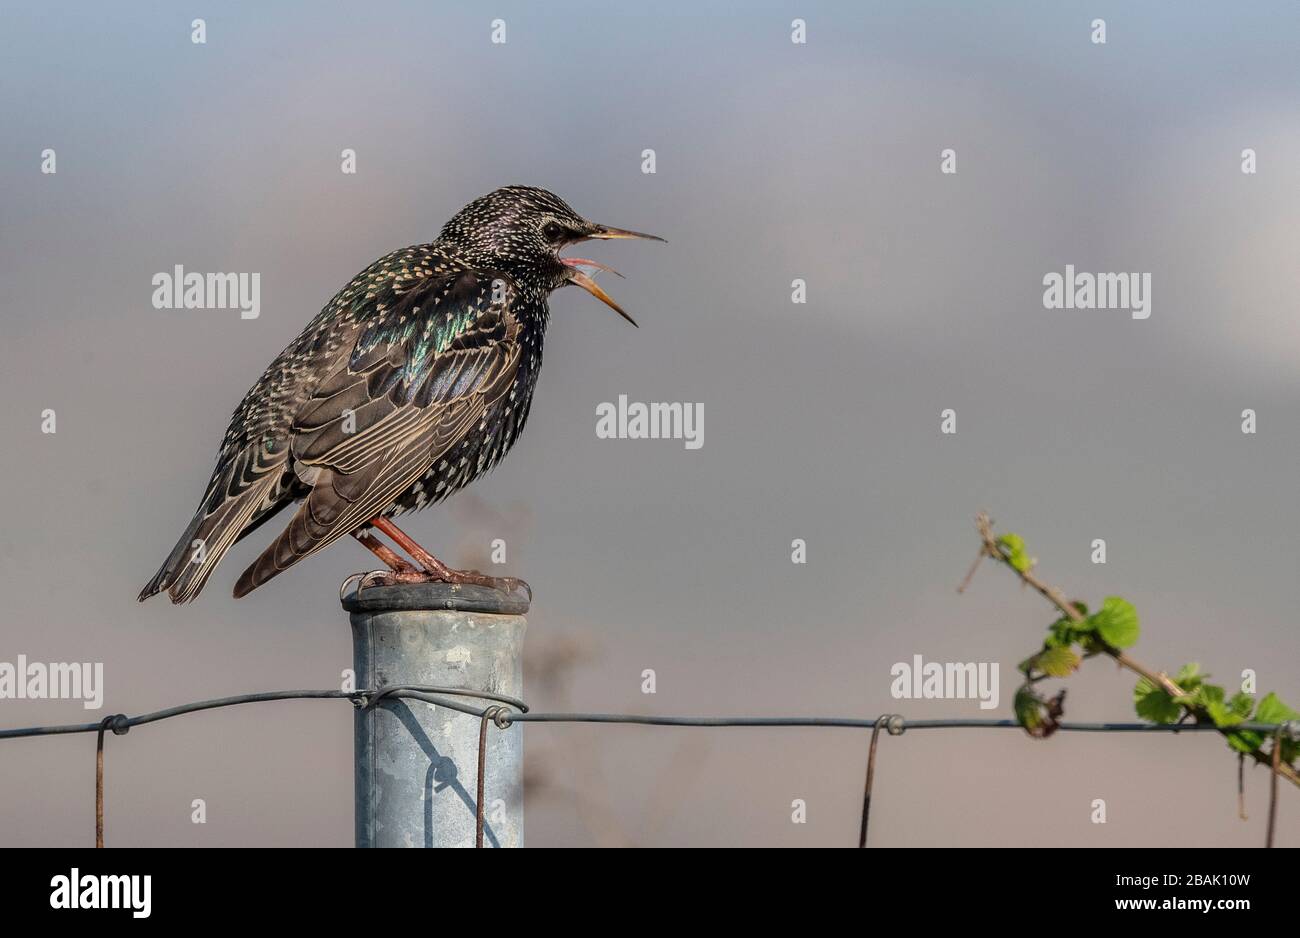 Common starling, Sturnus vulgaris, perched on fence post, in early spring plumage. Stock Photo